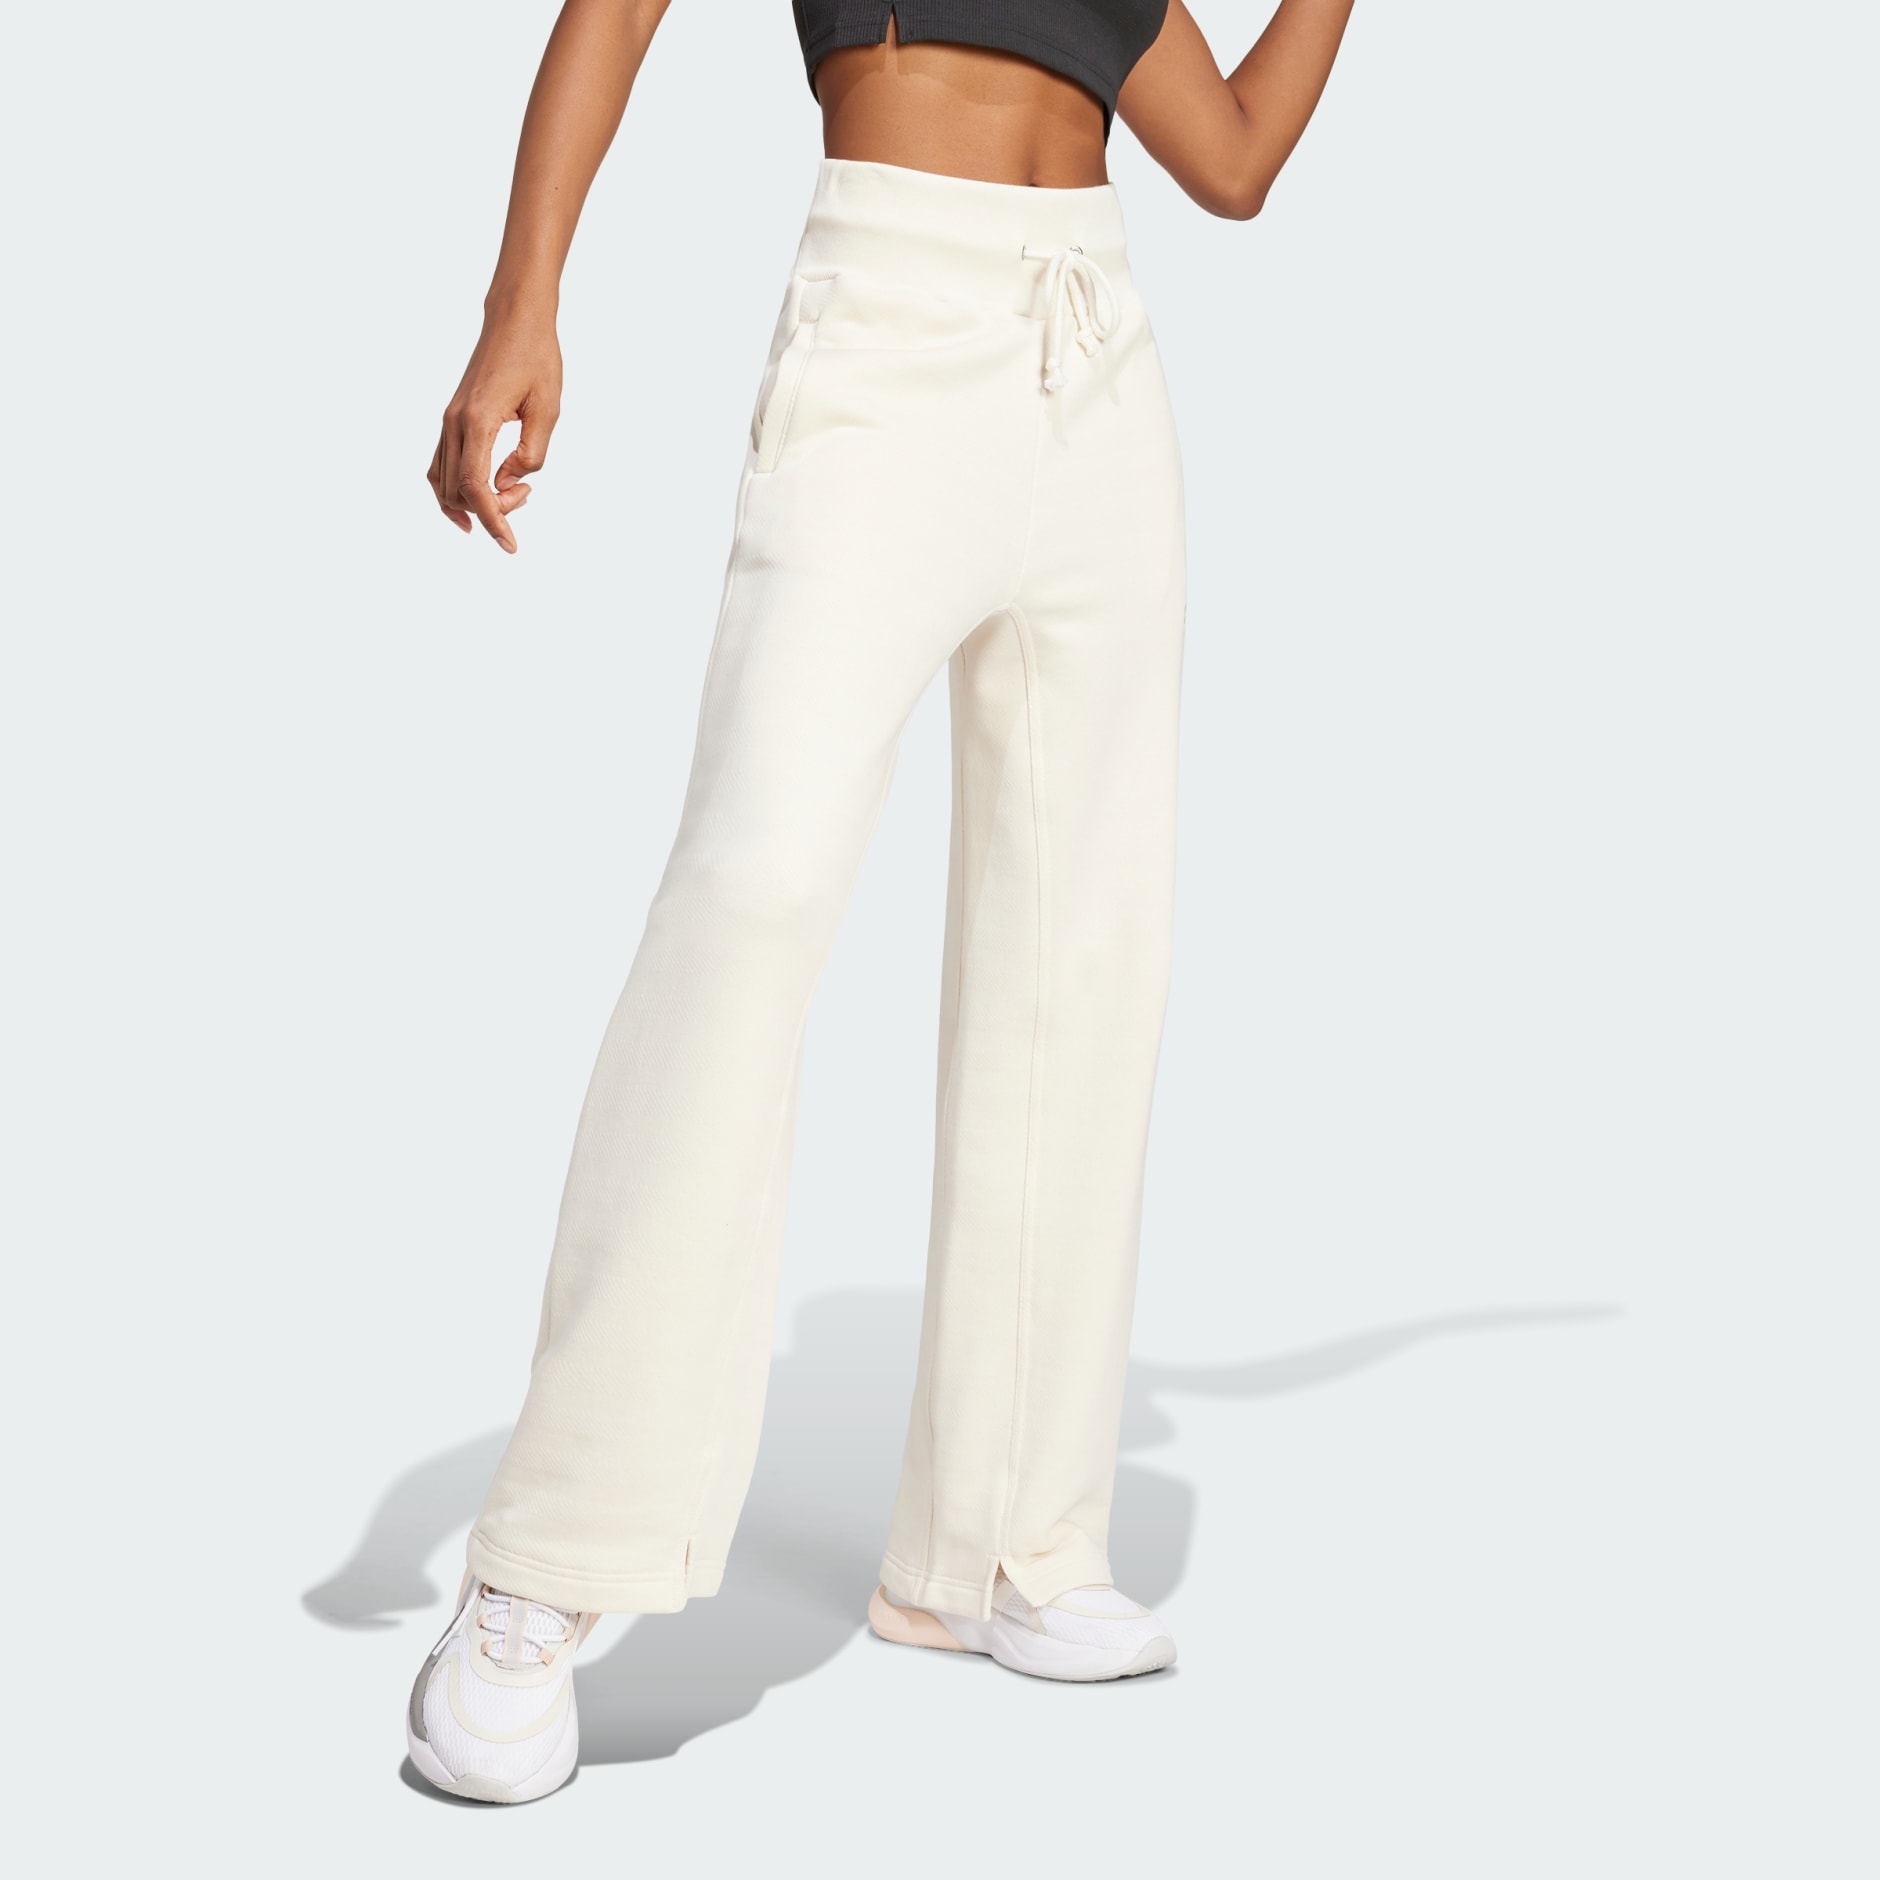 Women's Clothing - Lounge French Terry Straight Leg Pants - White